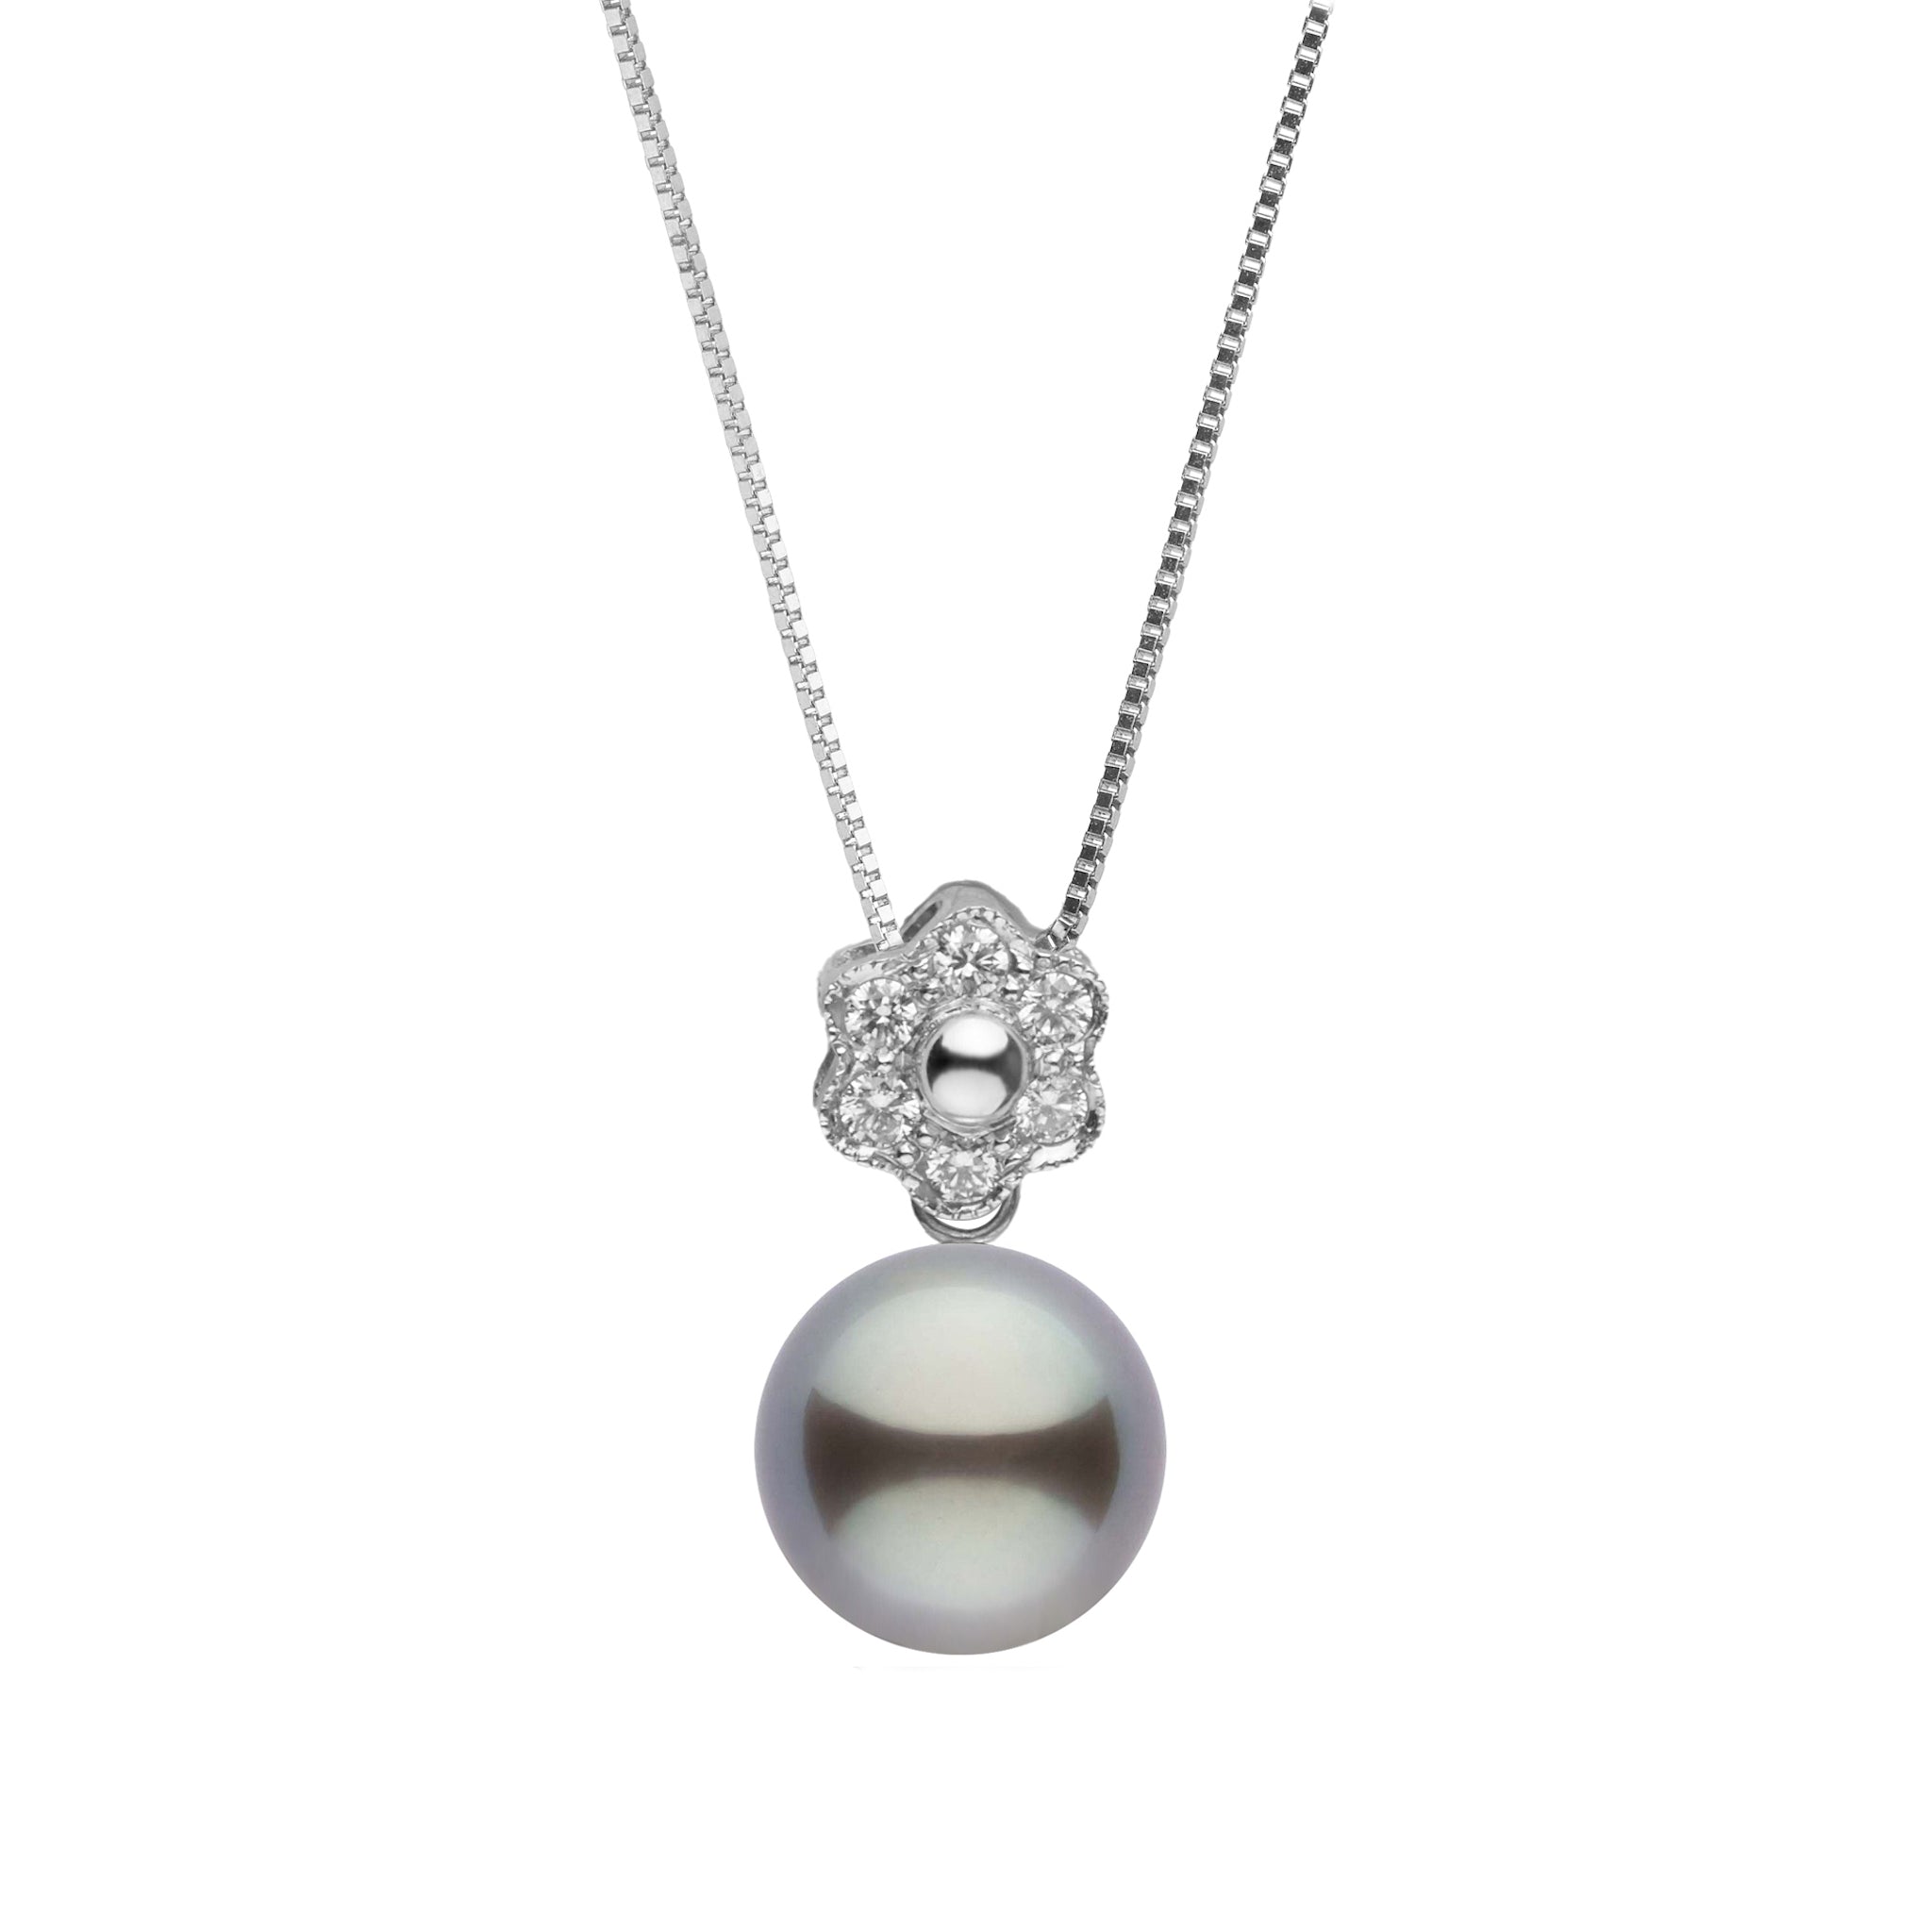 Rosette Collection 9.0-10.0 mm Tahitian Pearl and Diamond Pendant